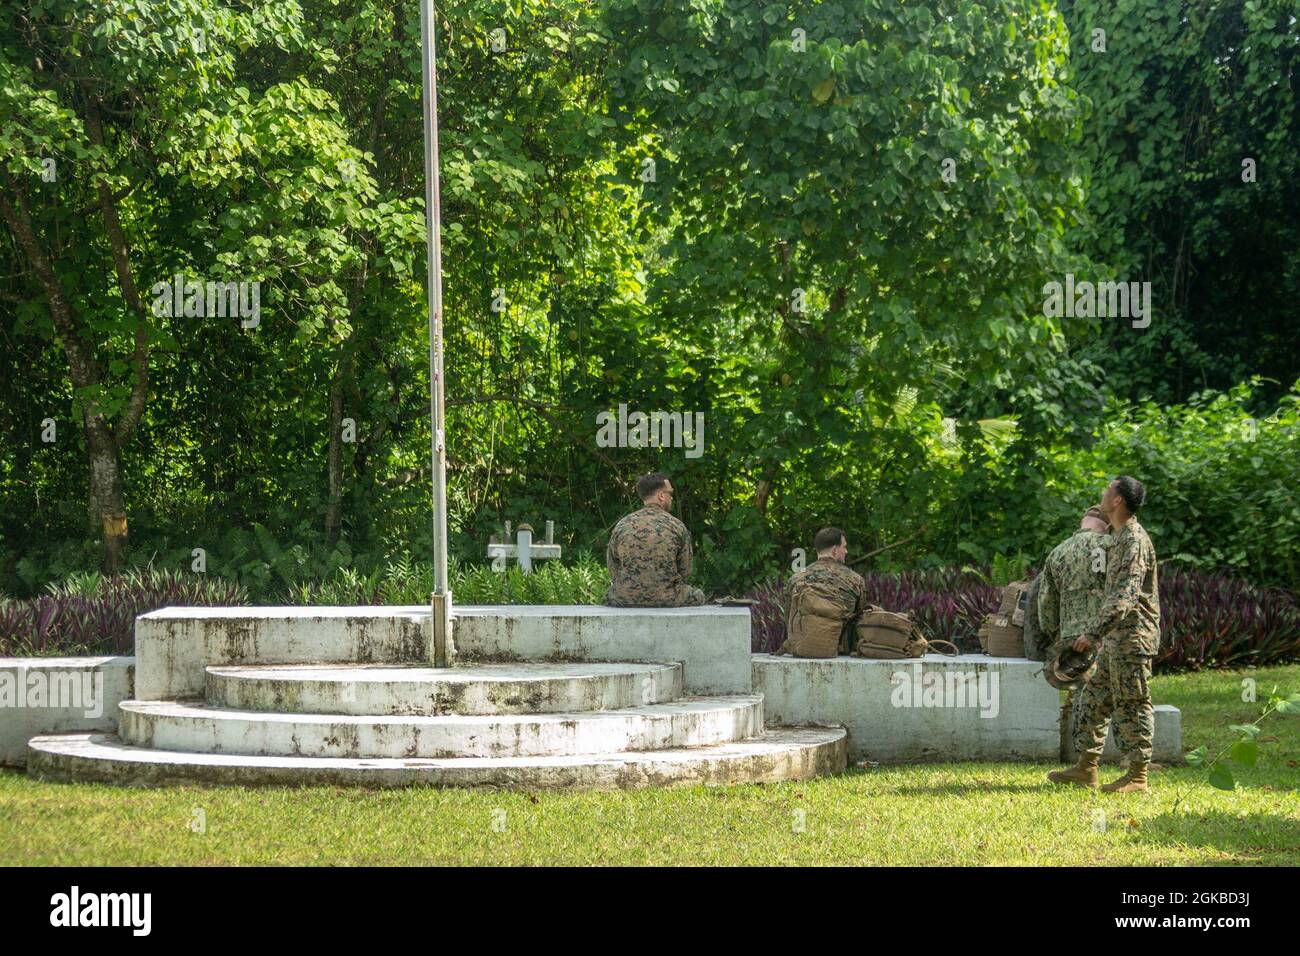 U.S. Marines and Sailors with the 31st Marine Expeditionary Unit (MEU) pay their respects at a memorial built to honor the Soldiers of 81st U.S. Army Infantry Division who fought during World War II on the Island of Peleliu, Republic of Palau, March 3, 2021. The 31st MEU is operating aboard ships of the Amphibious Squadron 11 in the 7th fleet area of operations to enhance interoperability with allies and partners and serve as a ready response force to defend peace and stability in the Indo-Pacific region. Stock Photo